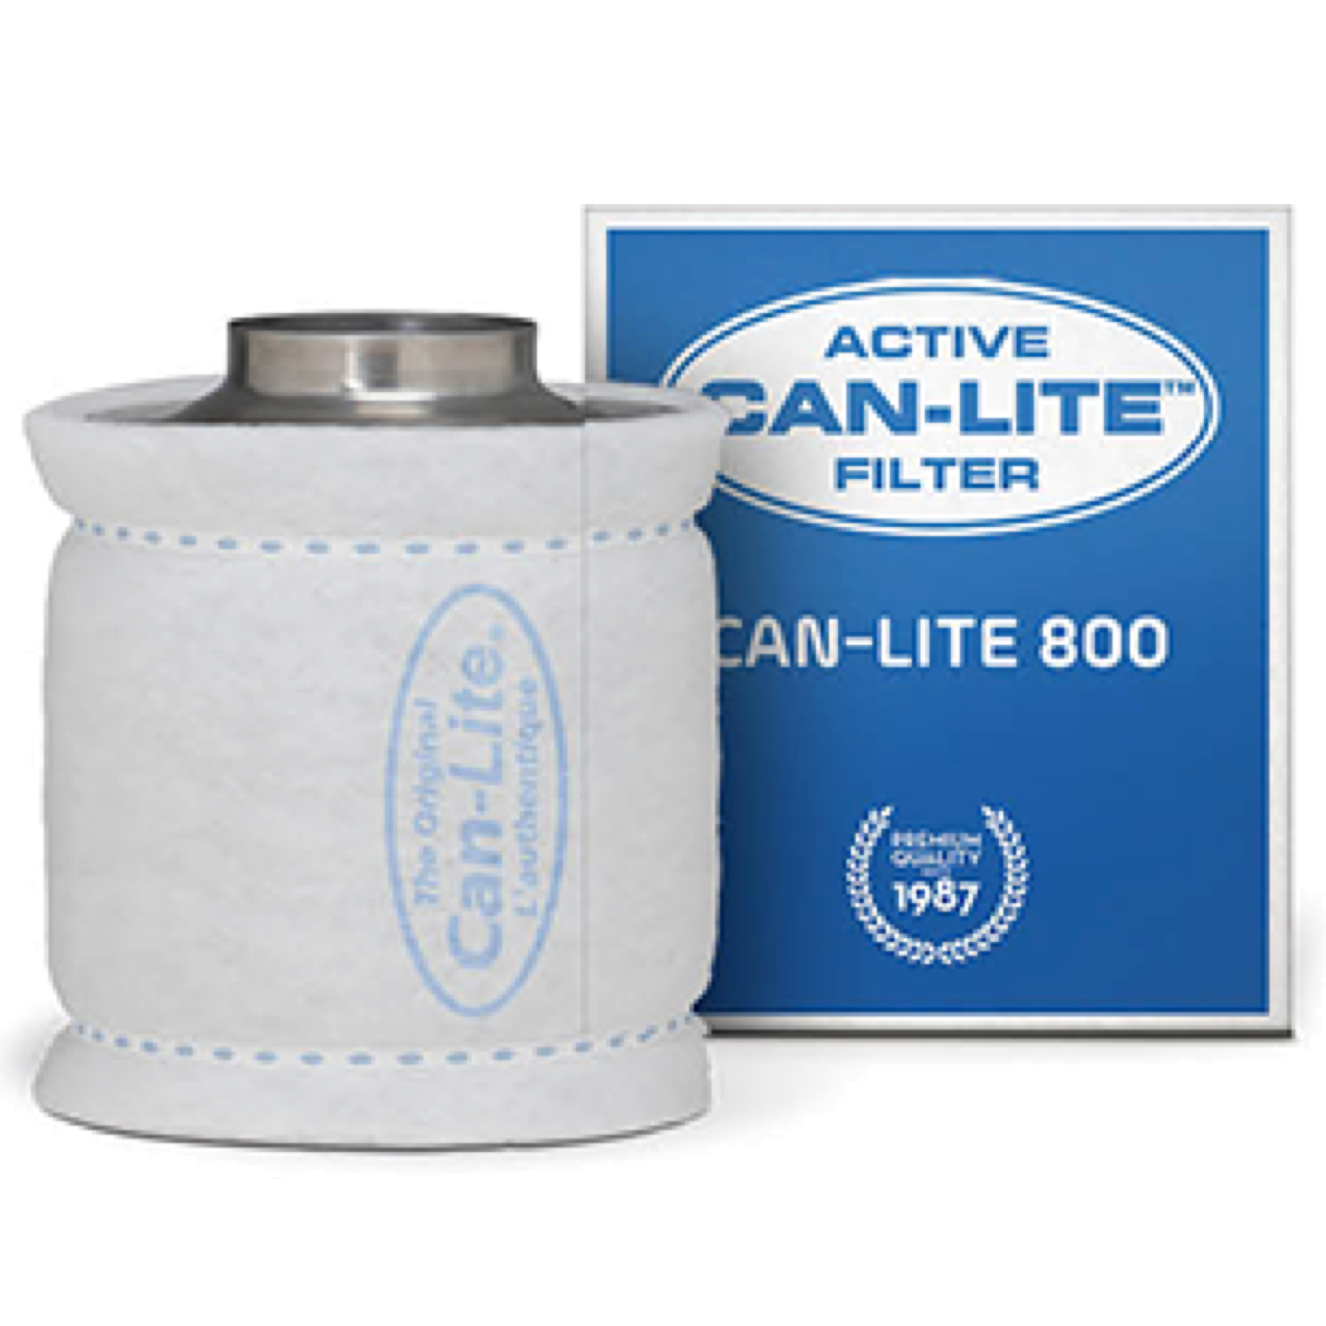 CAN-Lite 800 Carbon Filter (8inch/200mm)